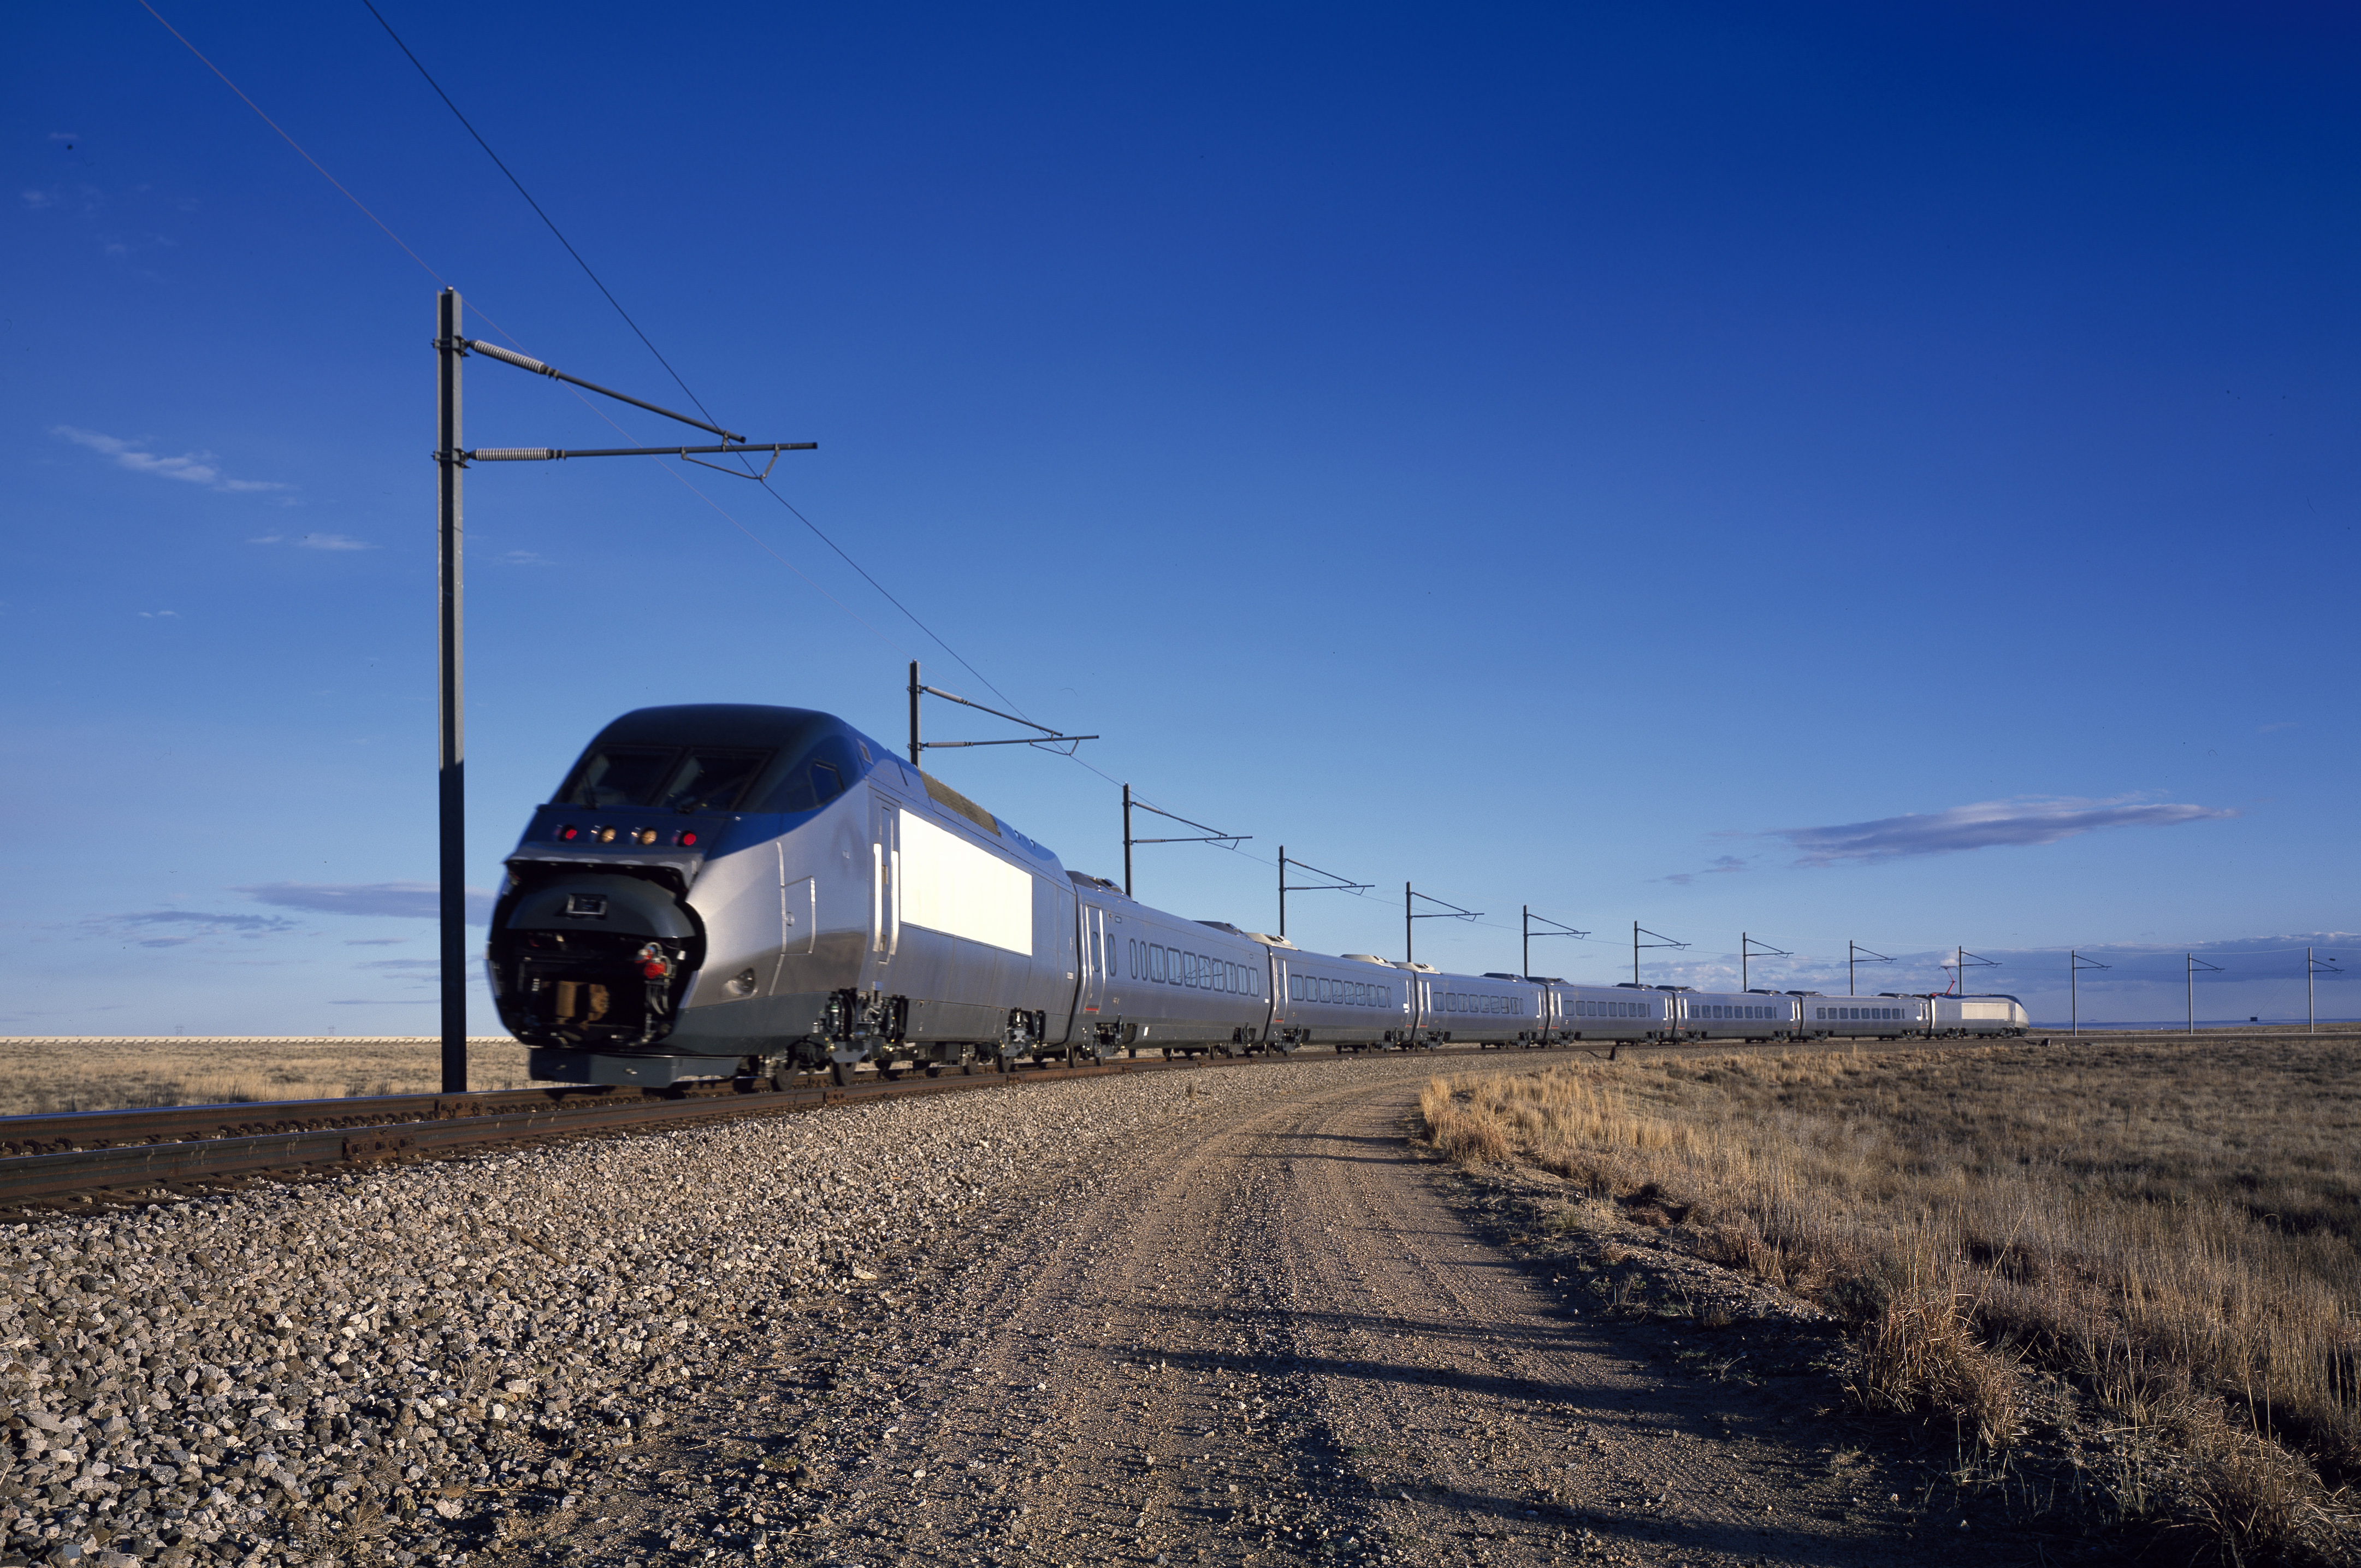 Testing of the Amtrak Acela high-speed train in Pueblo, Colorado, before it was put into service on